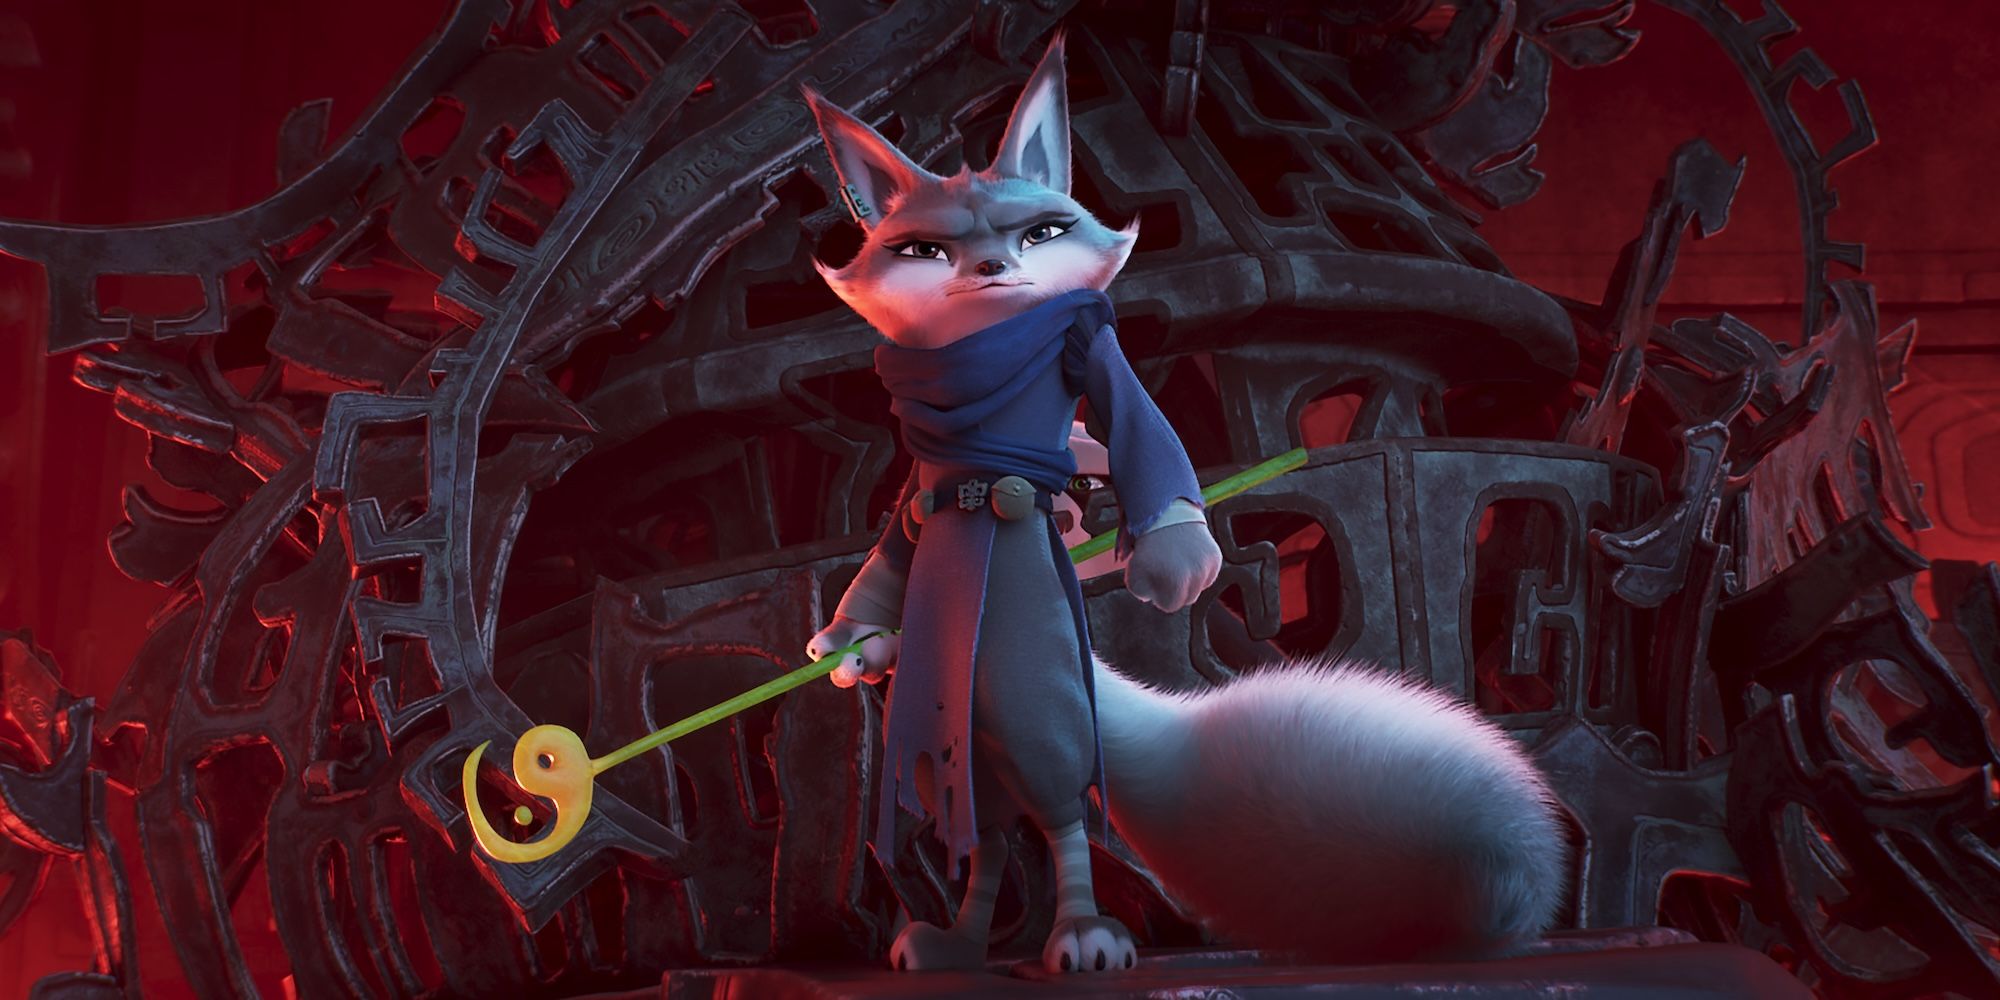 Zhen holds the staff of knowledge while fighting Chameleon in Kung Fu Panda 4